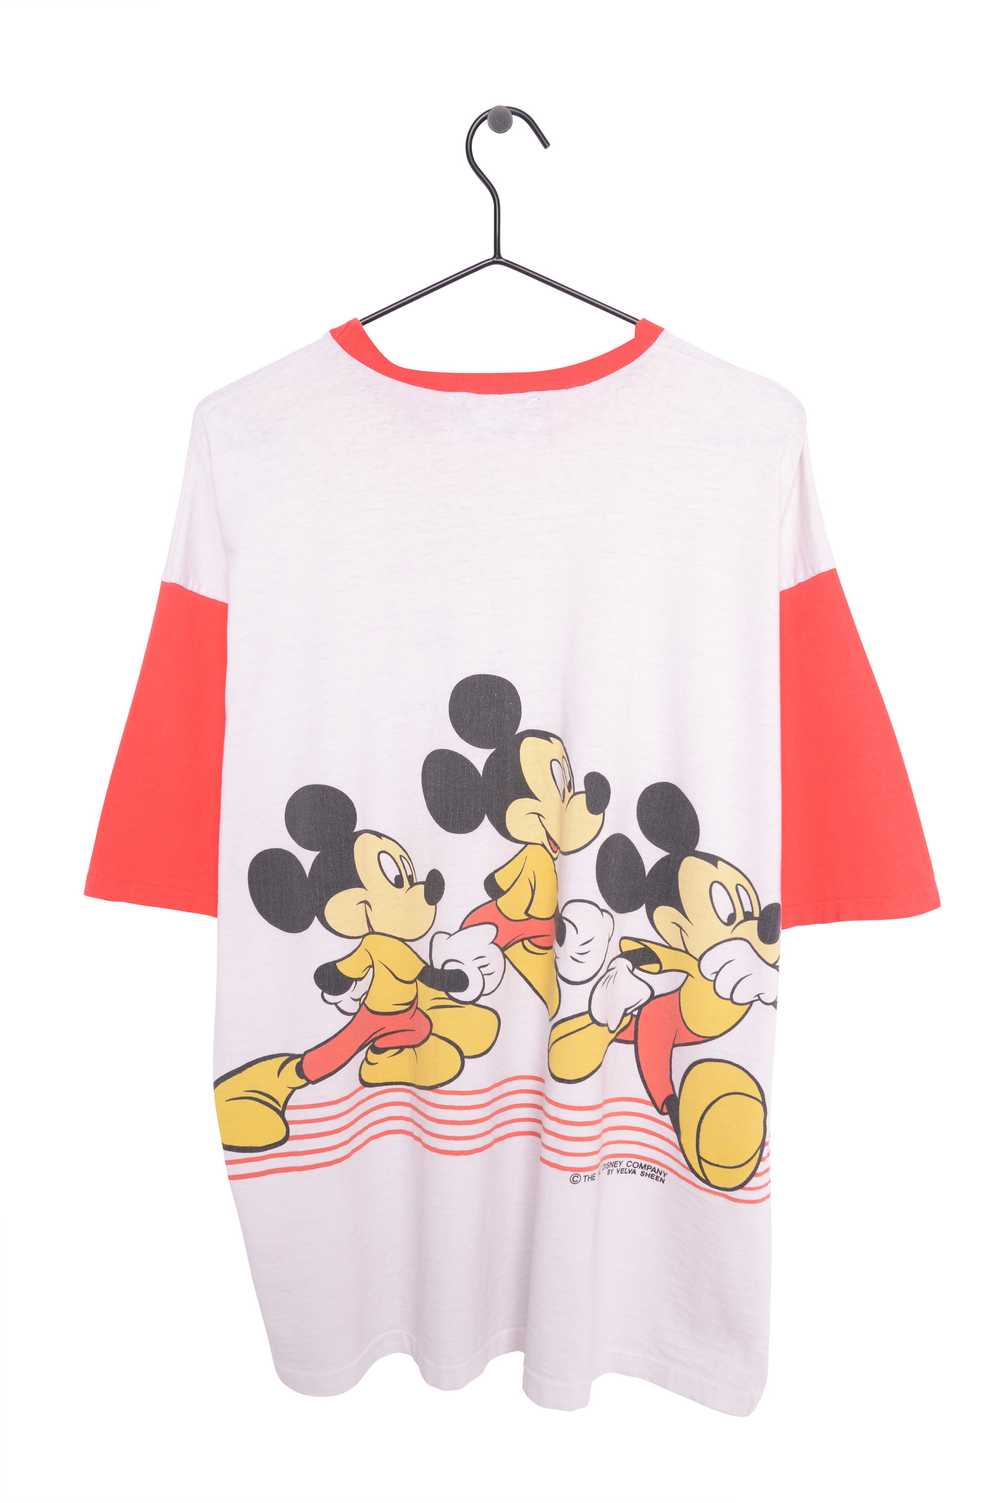 1990s Mickey Mouse Tee - image 2